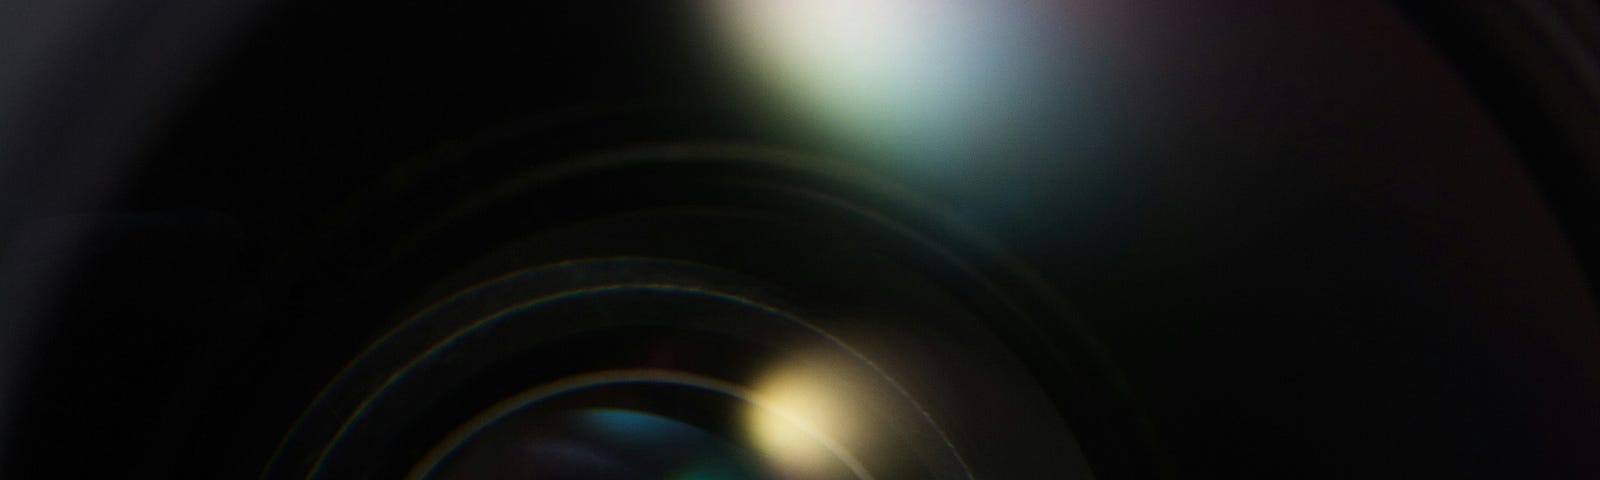 An endless lens of a camera looking inward into your life.